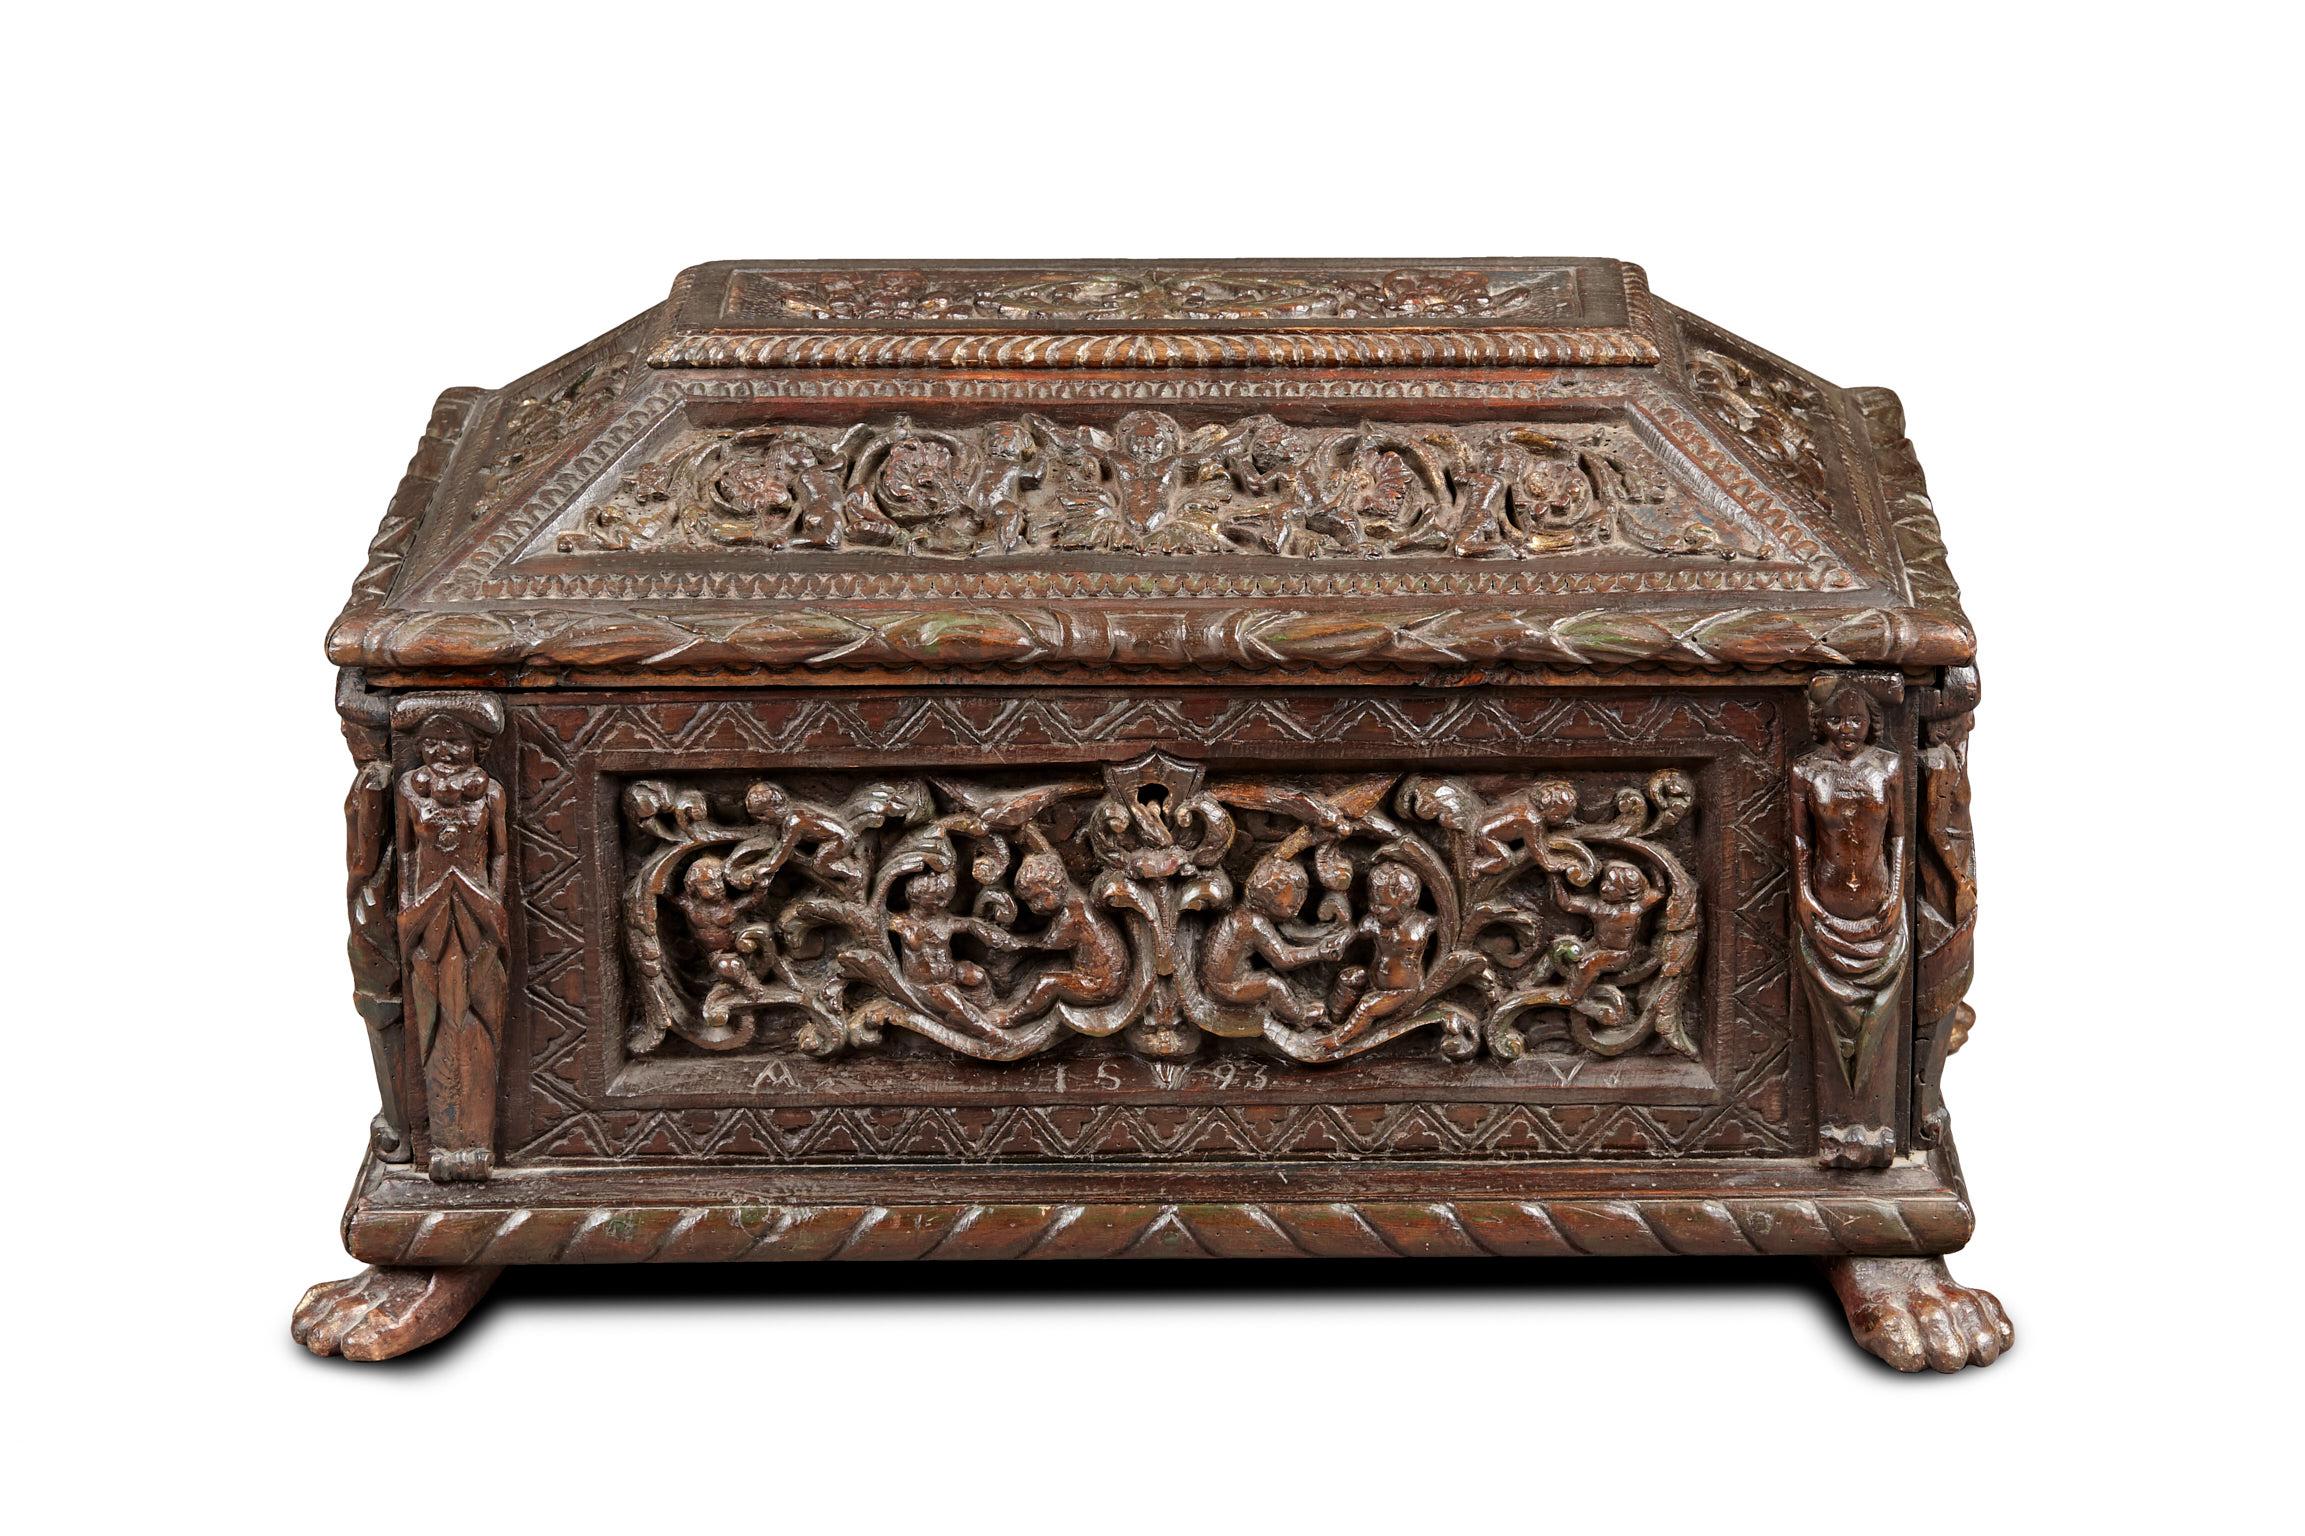 Late 16th century Italian Renaissance painted deal casket, dated 1593.
 
The casket with raised lid all carved with Cherubs and floral interlace bordered by bold acanthus. The front panel of interlaced Putti and Cherubs above a mask, flanked by